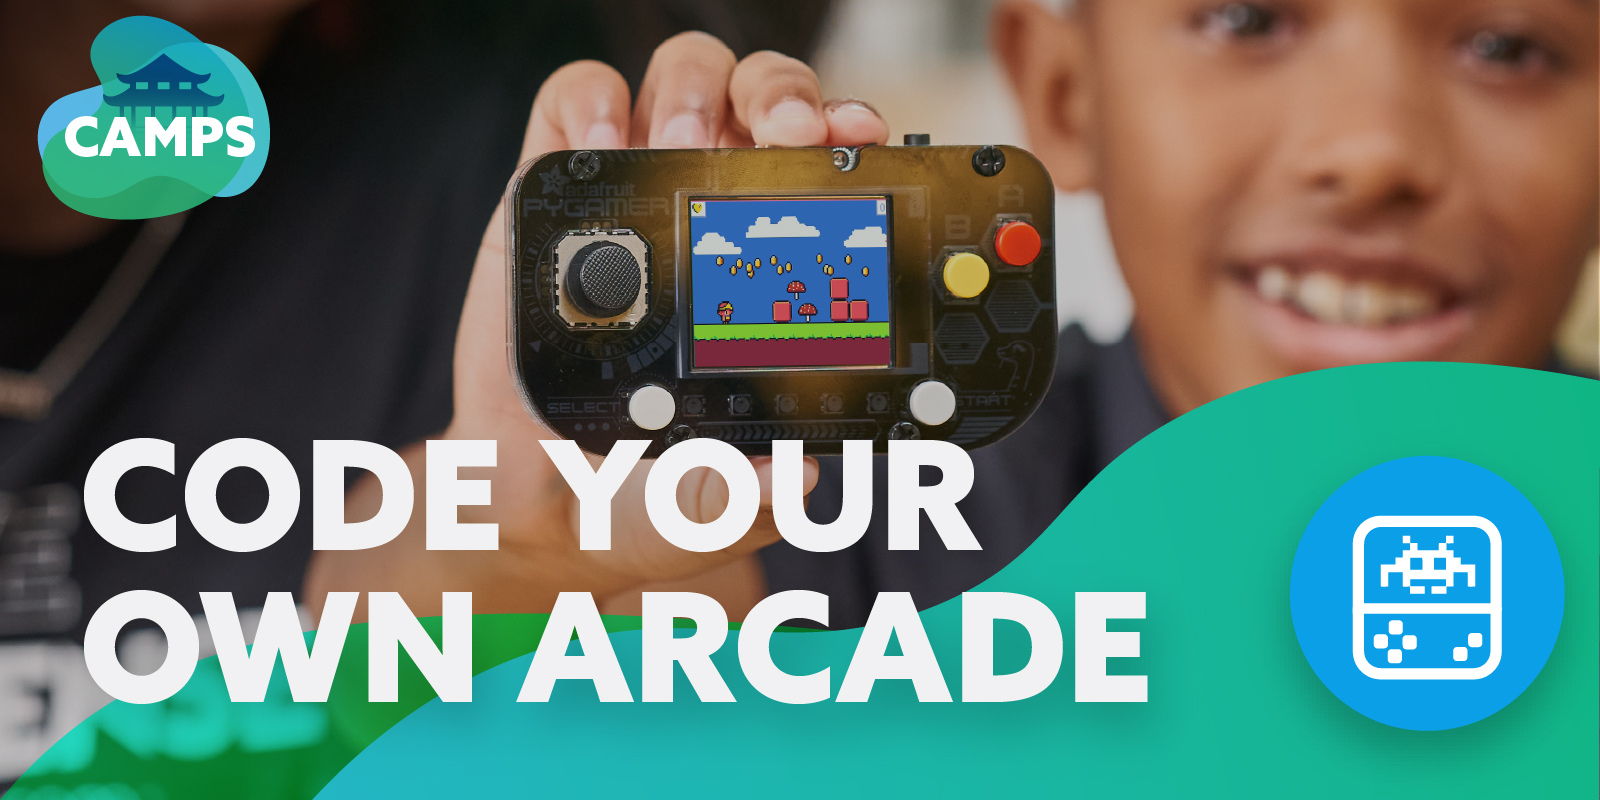 Code Your Own Arcade promotional image